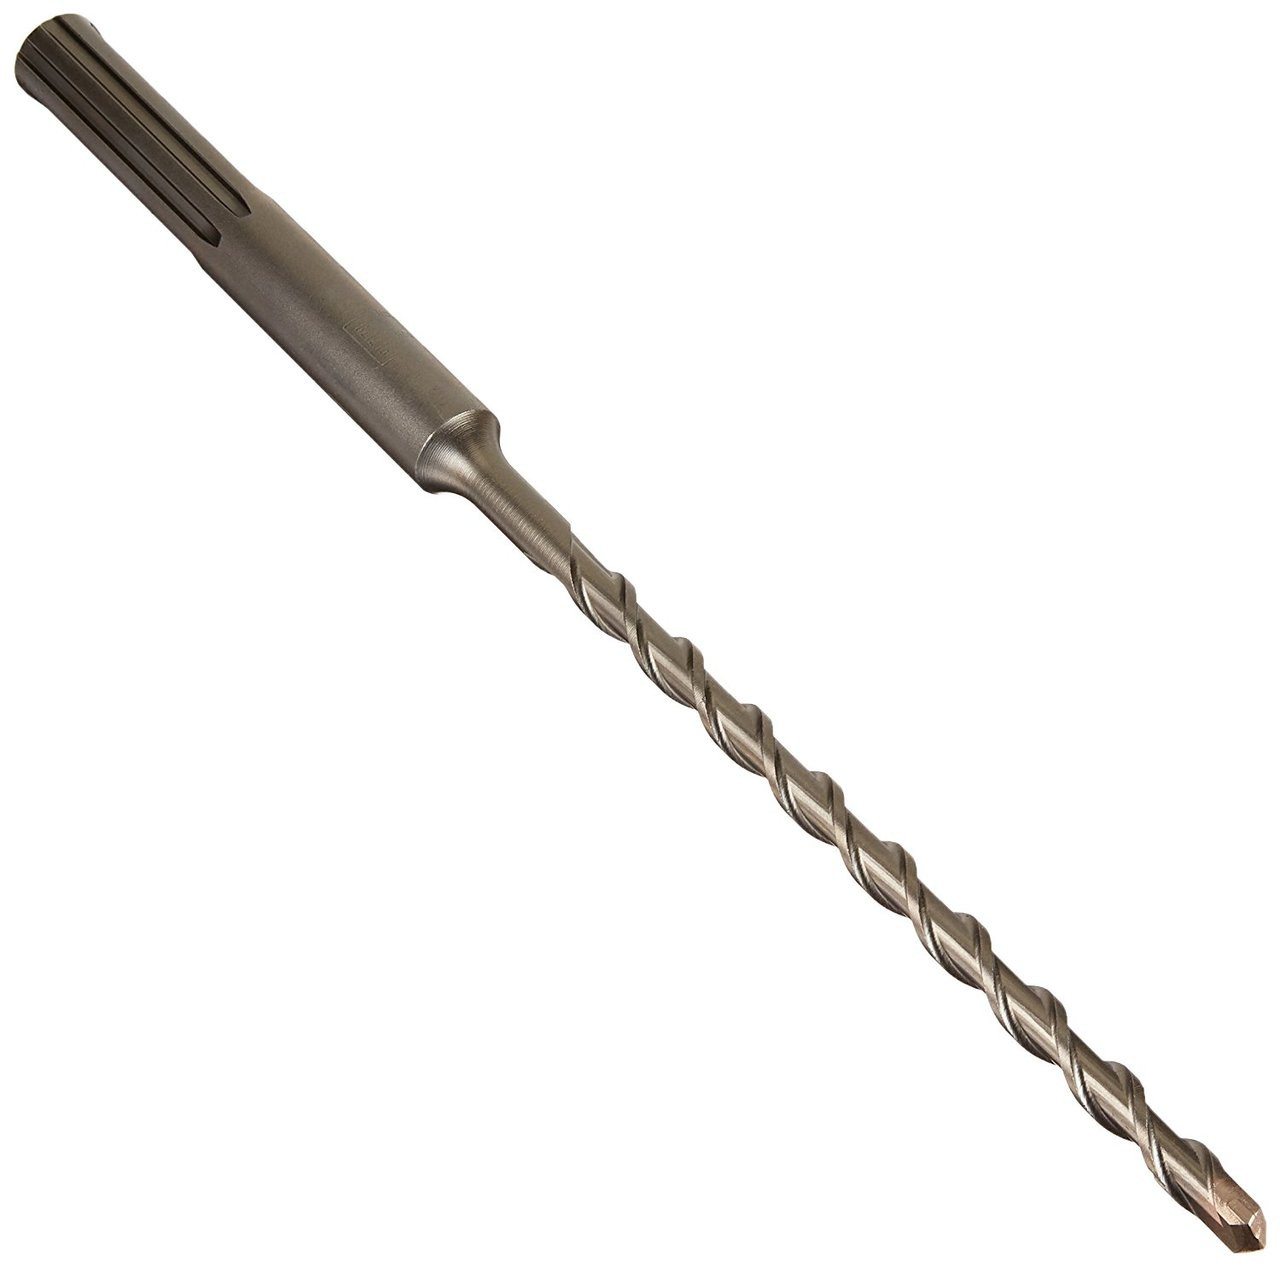 Simpson Strong Tie MDMX05013  SDS-MAX Shank Bit, 1/2" x 7-1/2" x 13" Overall Length 2 Cutter